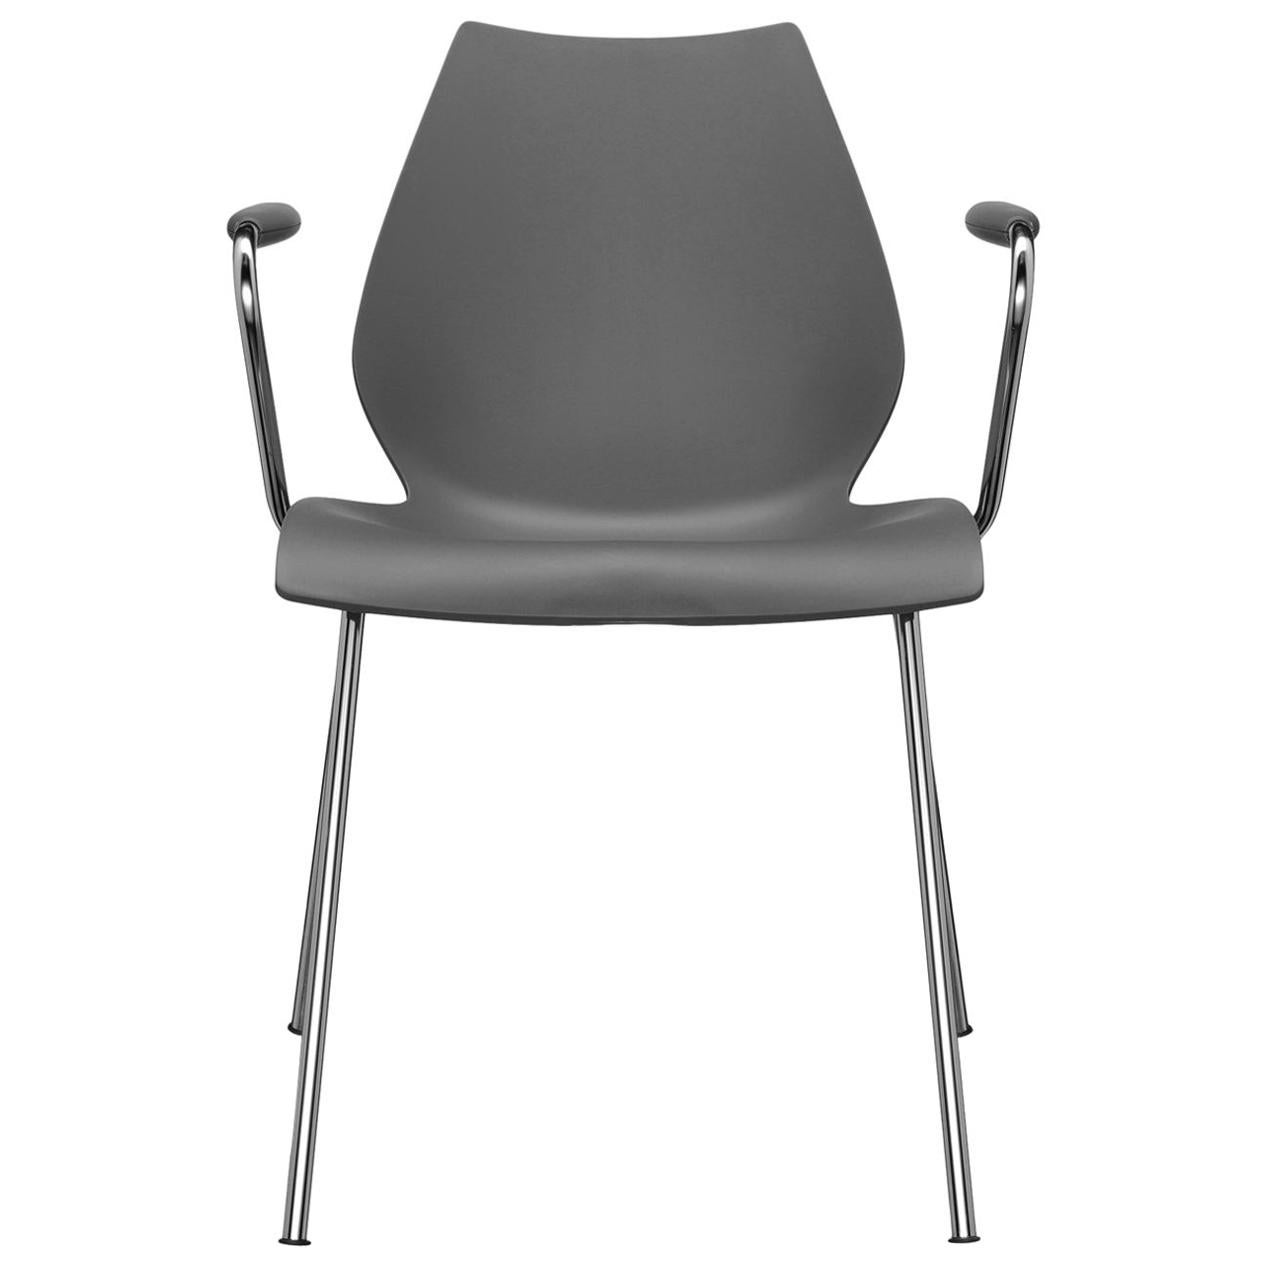 Set of 2 Kartell Maui Armchair in Anthracite by Ludovica and Roberto Palomba